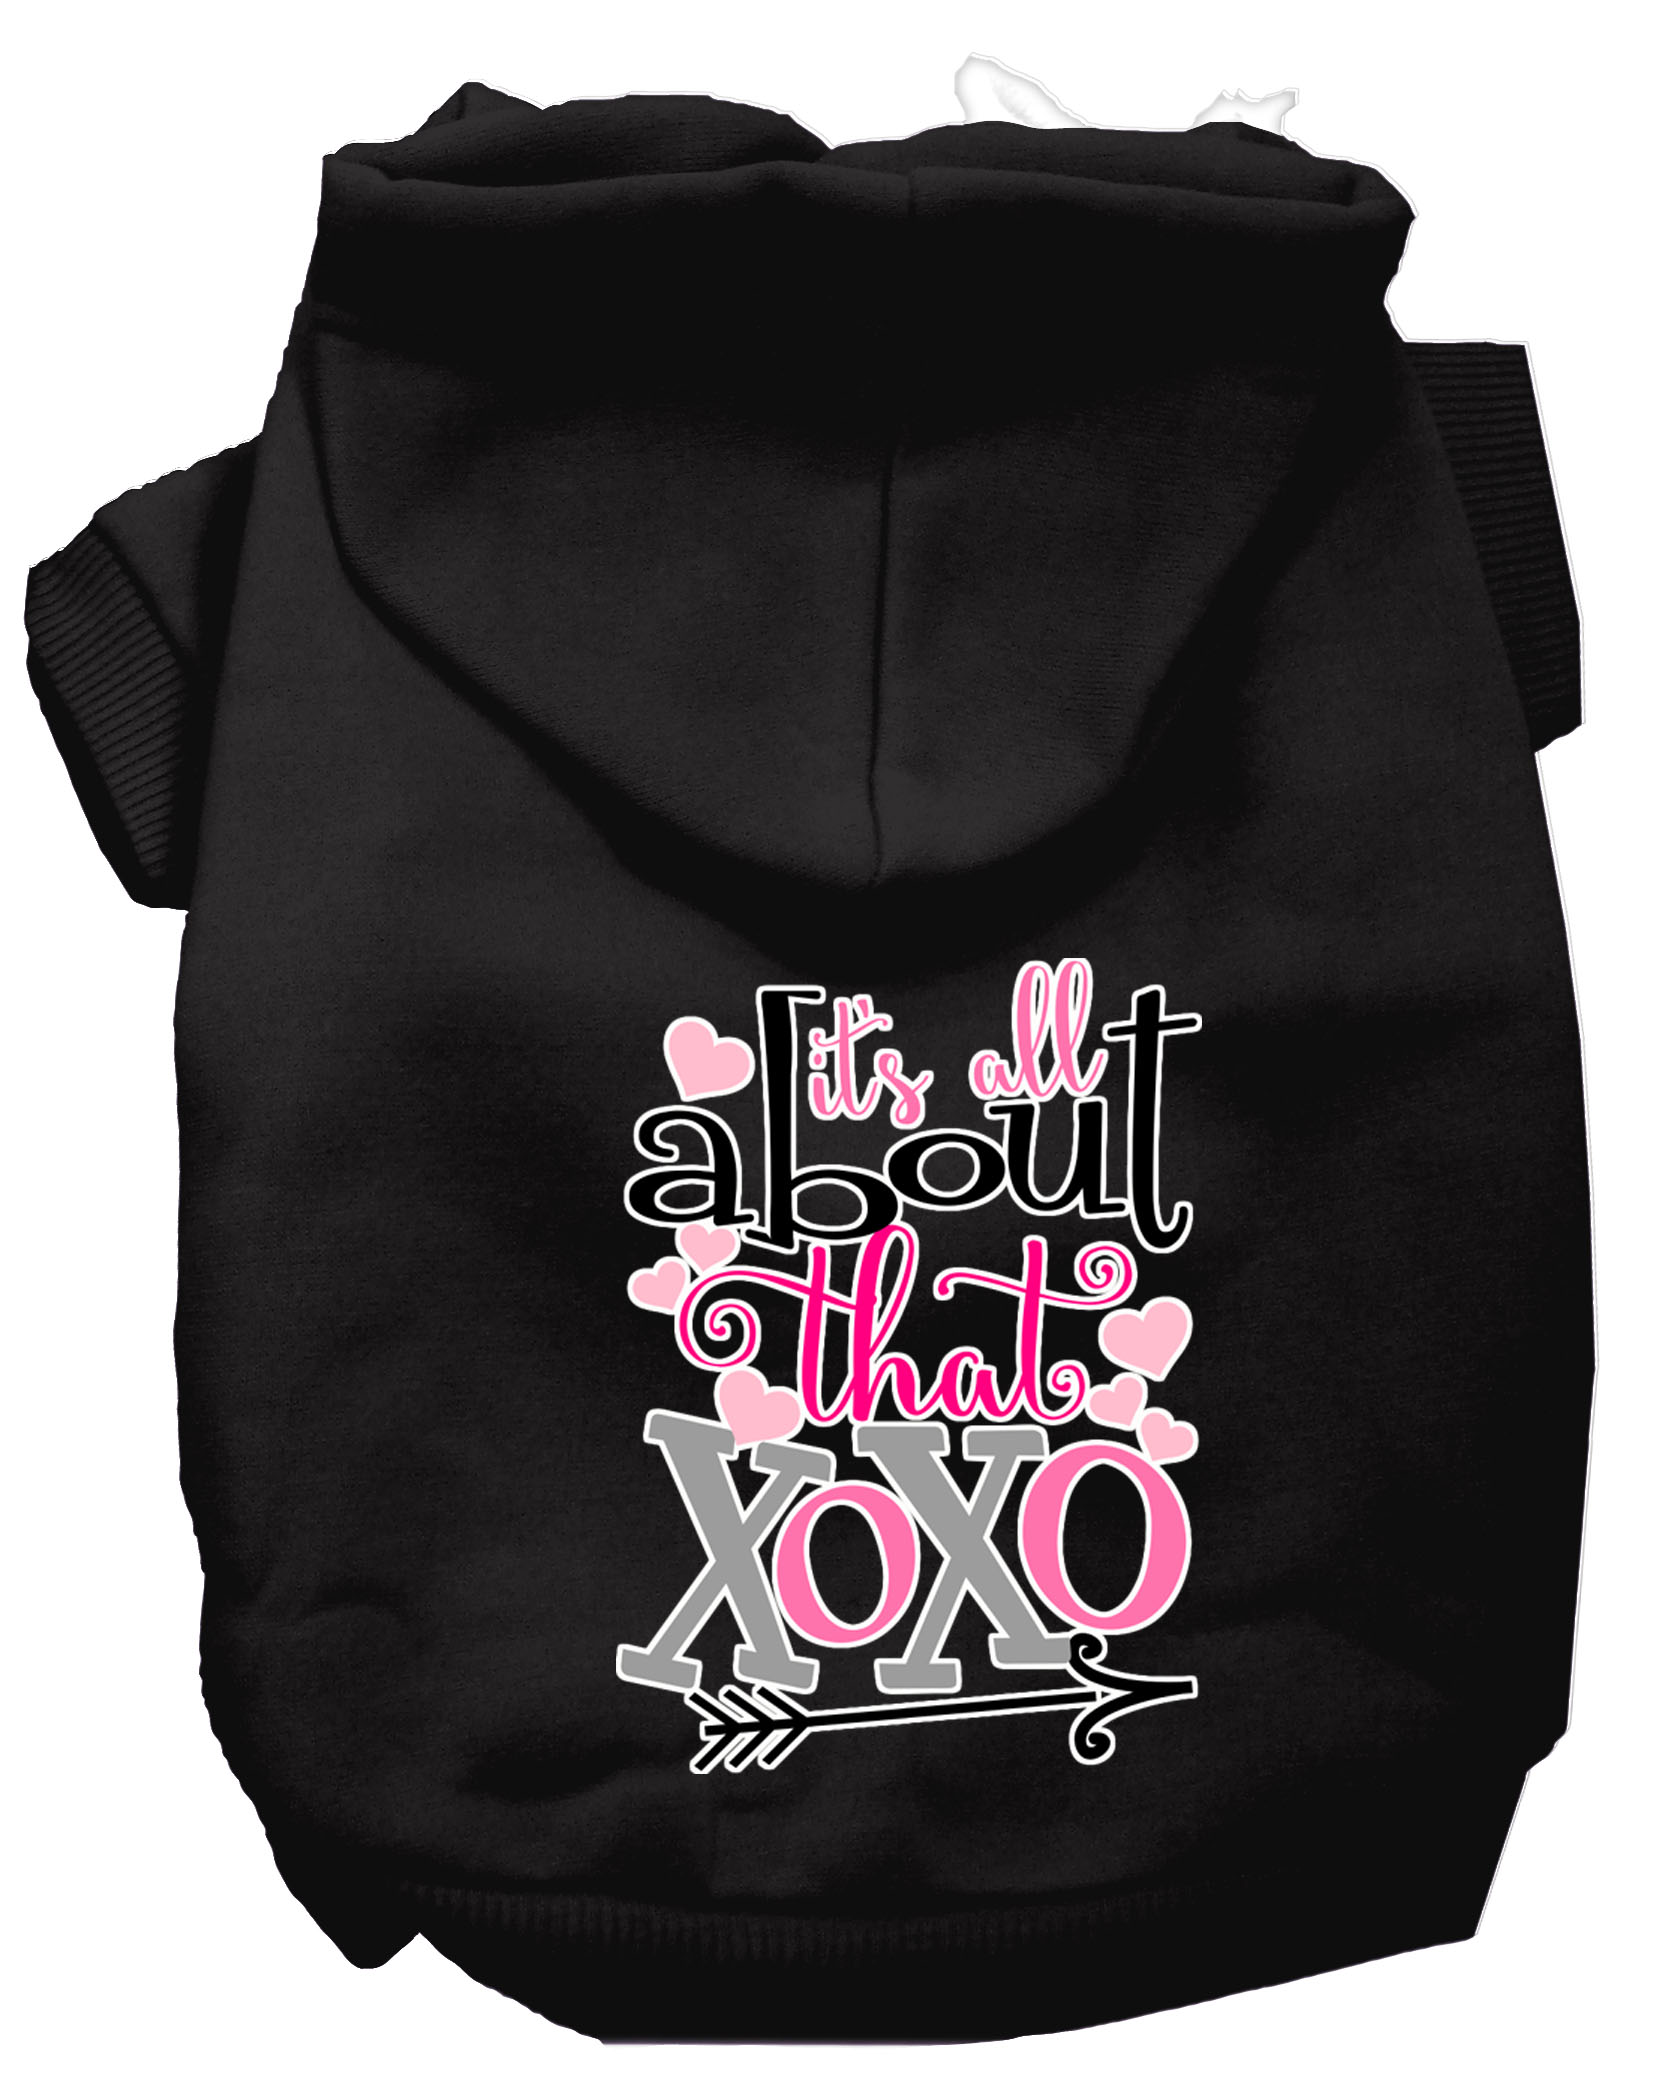 All About that XOXO Screen Print Dog Hoodie Black L